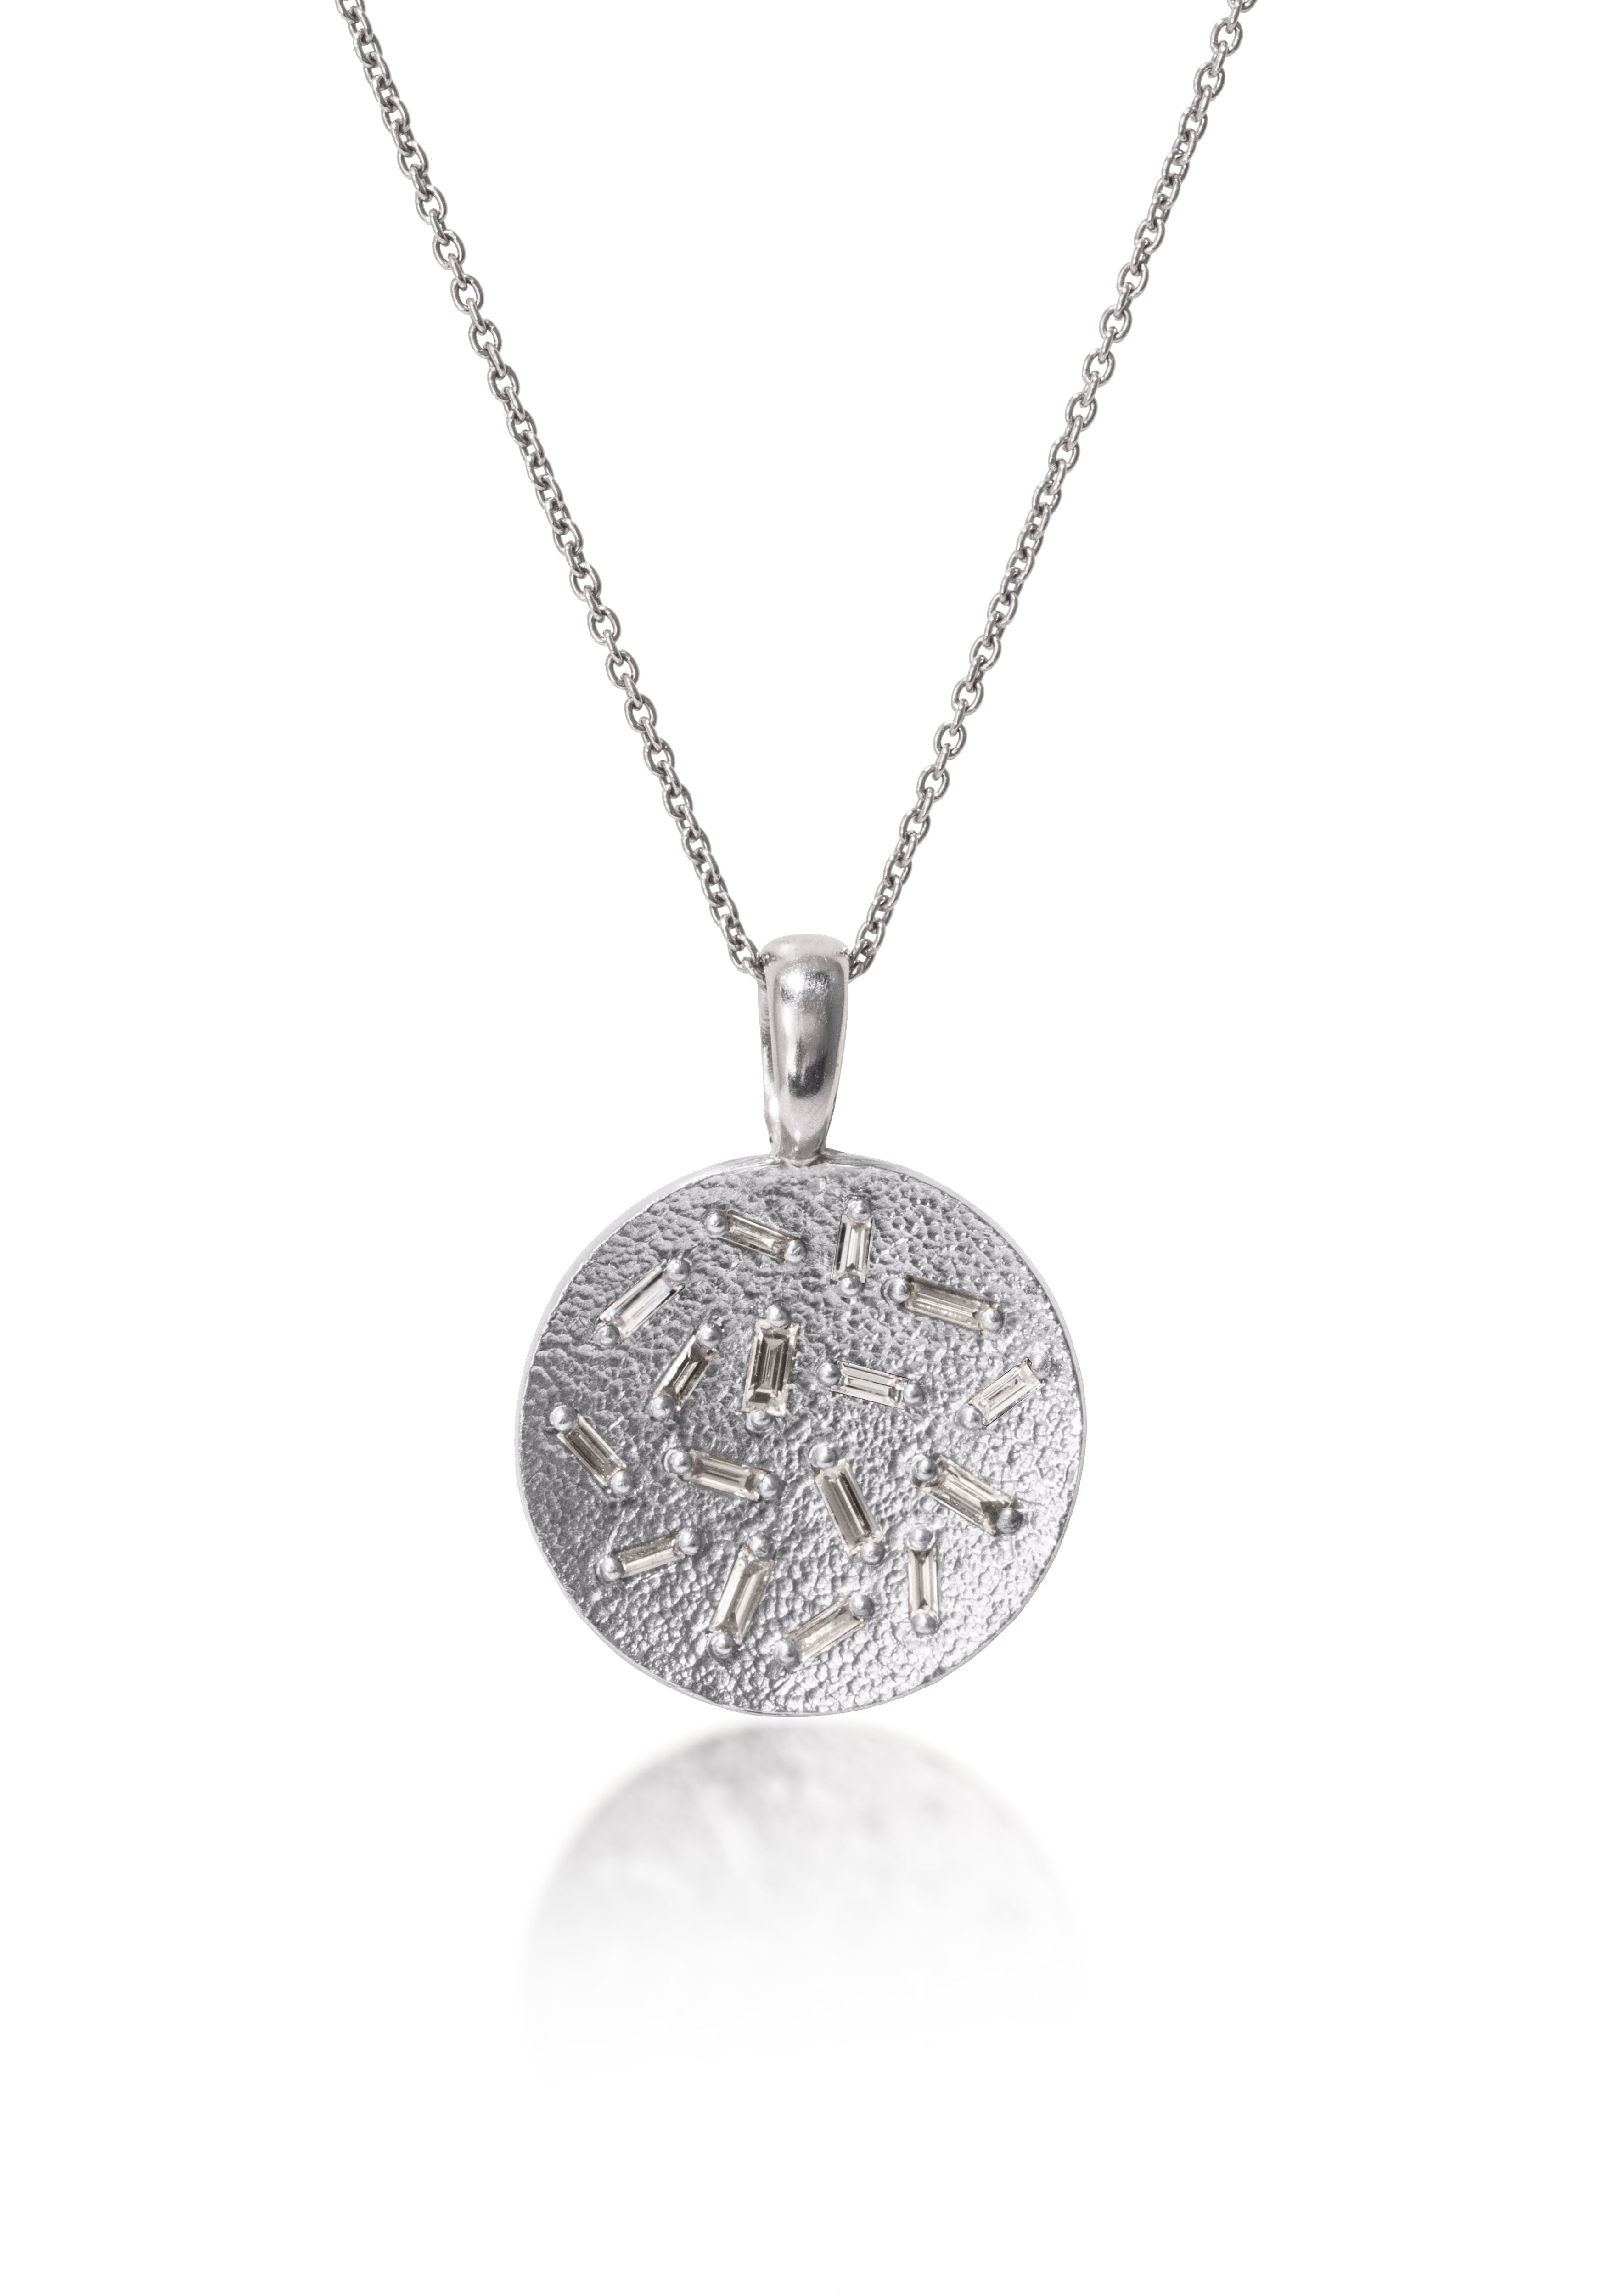 This radiant, medium size circular pendant is set with 16 white diamond baguettes. Richly textured to shimmer in the light, this piece is available in three color ways, oxidized silver, 18k gold and palladium.  0.435 tcw.